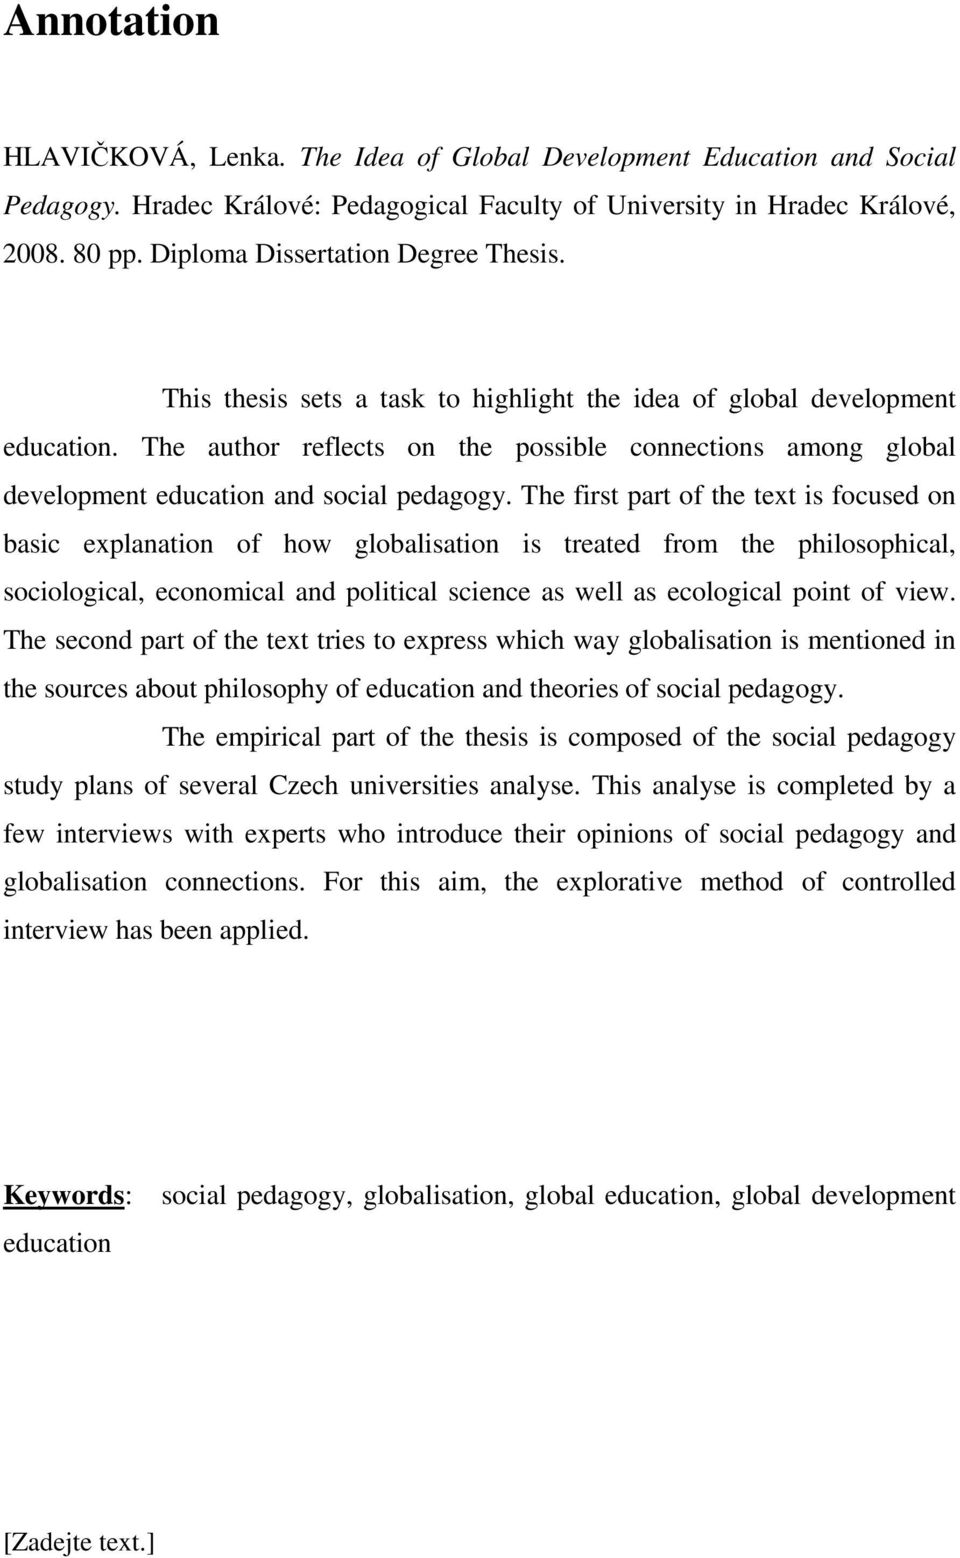 The author reflects on the possible connections among global development education and social pedagogy.